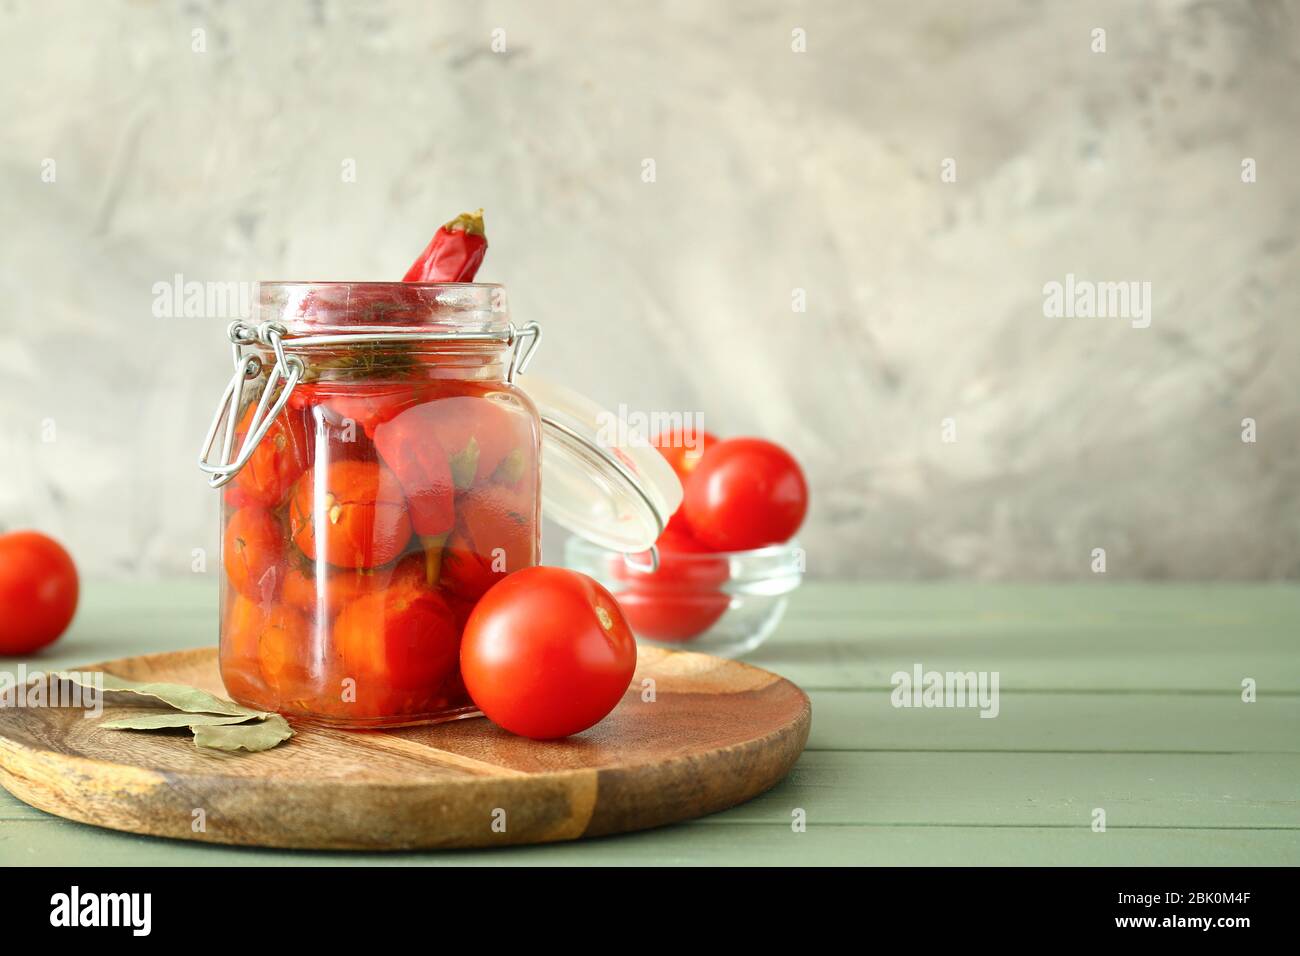 Jar With Canned Tomatoes And Chili Pepper On Wooden Table Stock Photo Alamy,Best Emergency Food Supply Company